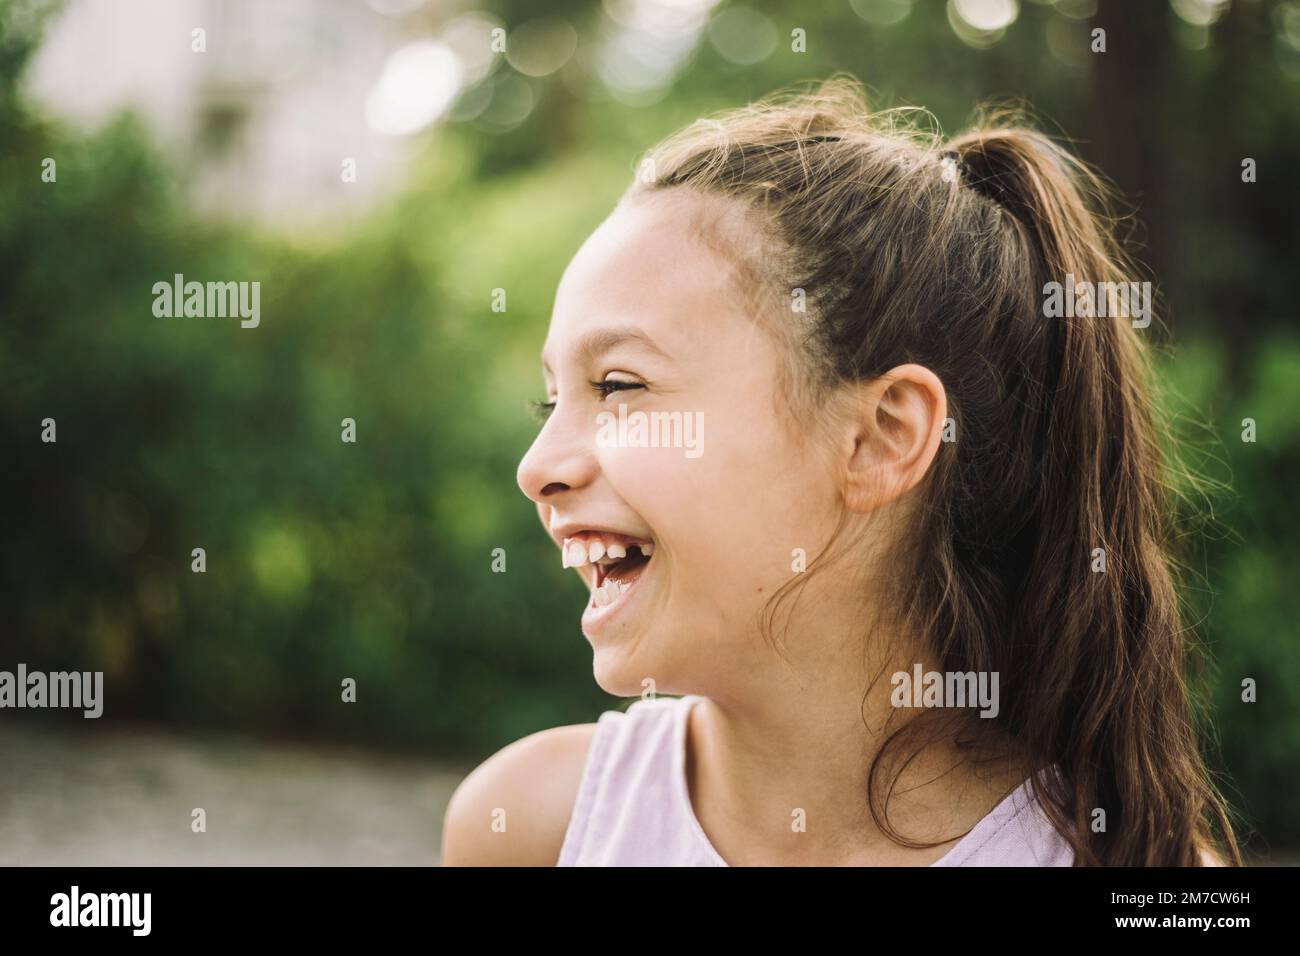 Cheerful girl looking away and laughing Stock Photo